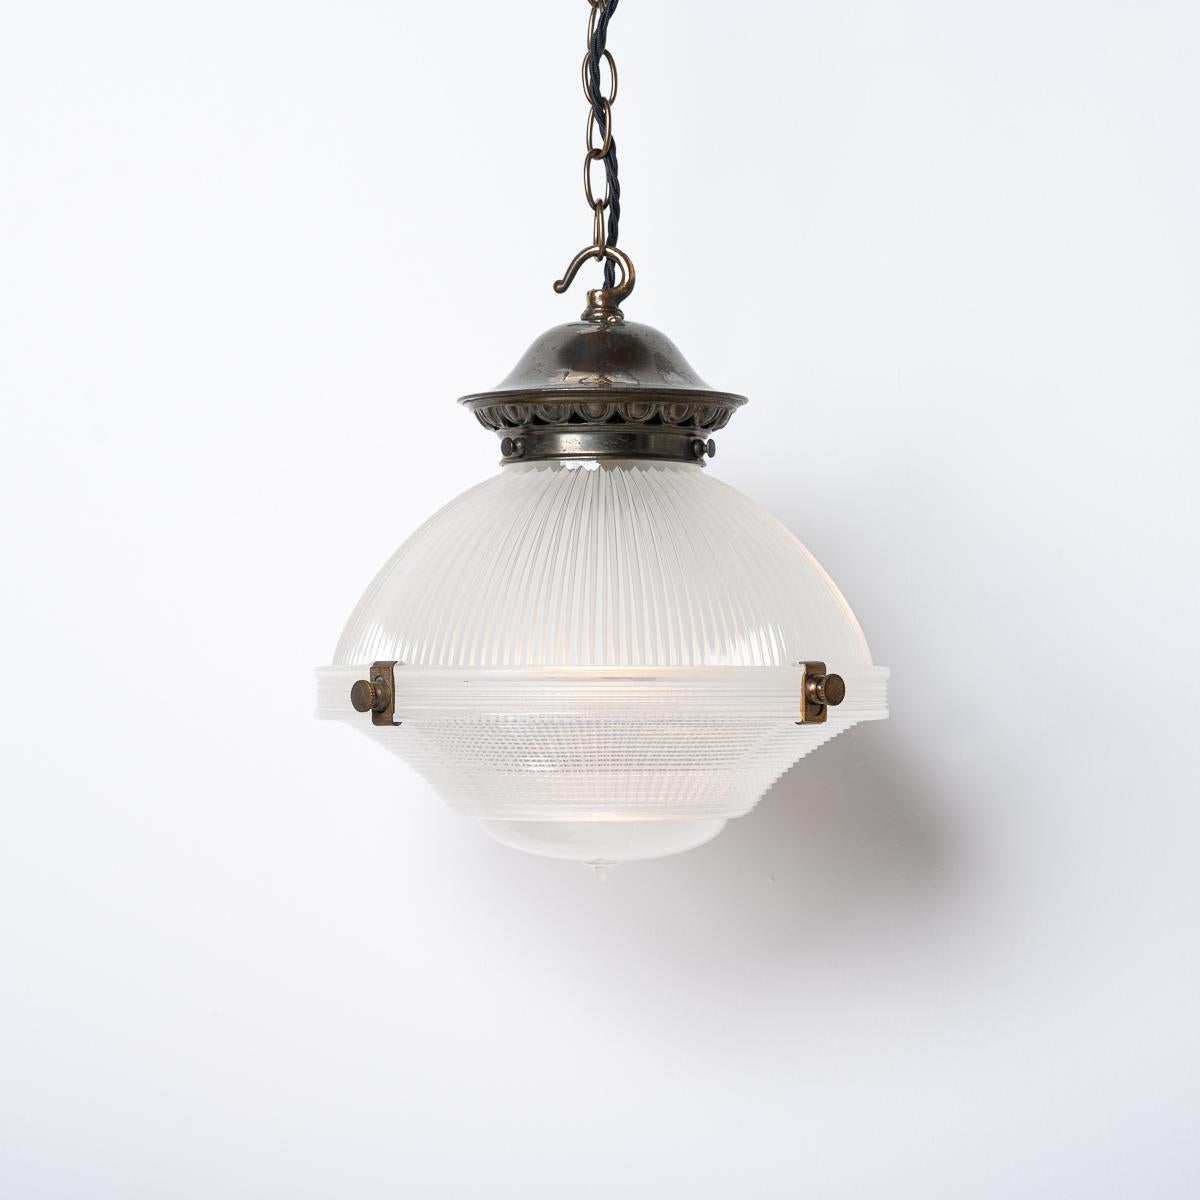 A RARE RUN OF MEDIUM HOLOPHANE THREE PART PENDANT LIGHTS 

PRICE IS PER LIGHT

A stunning run of 12 vintage Holophane pendant lights reclaimed from an abandoned 150 year old chapel originally built in 1876 in the heart of Gwynedd village in Wales,